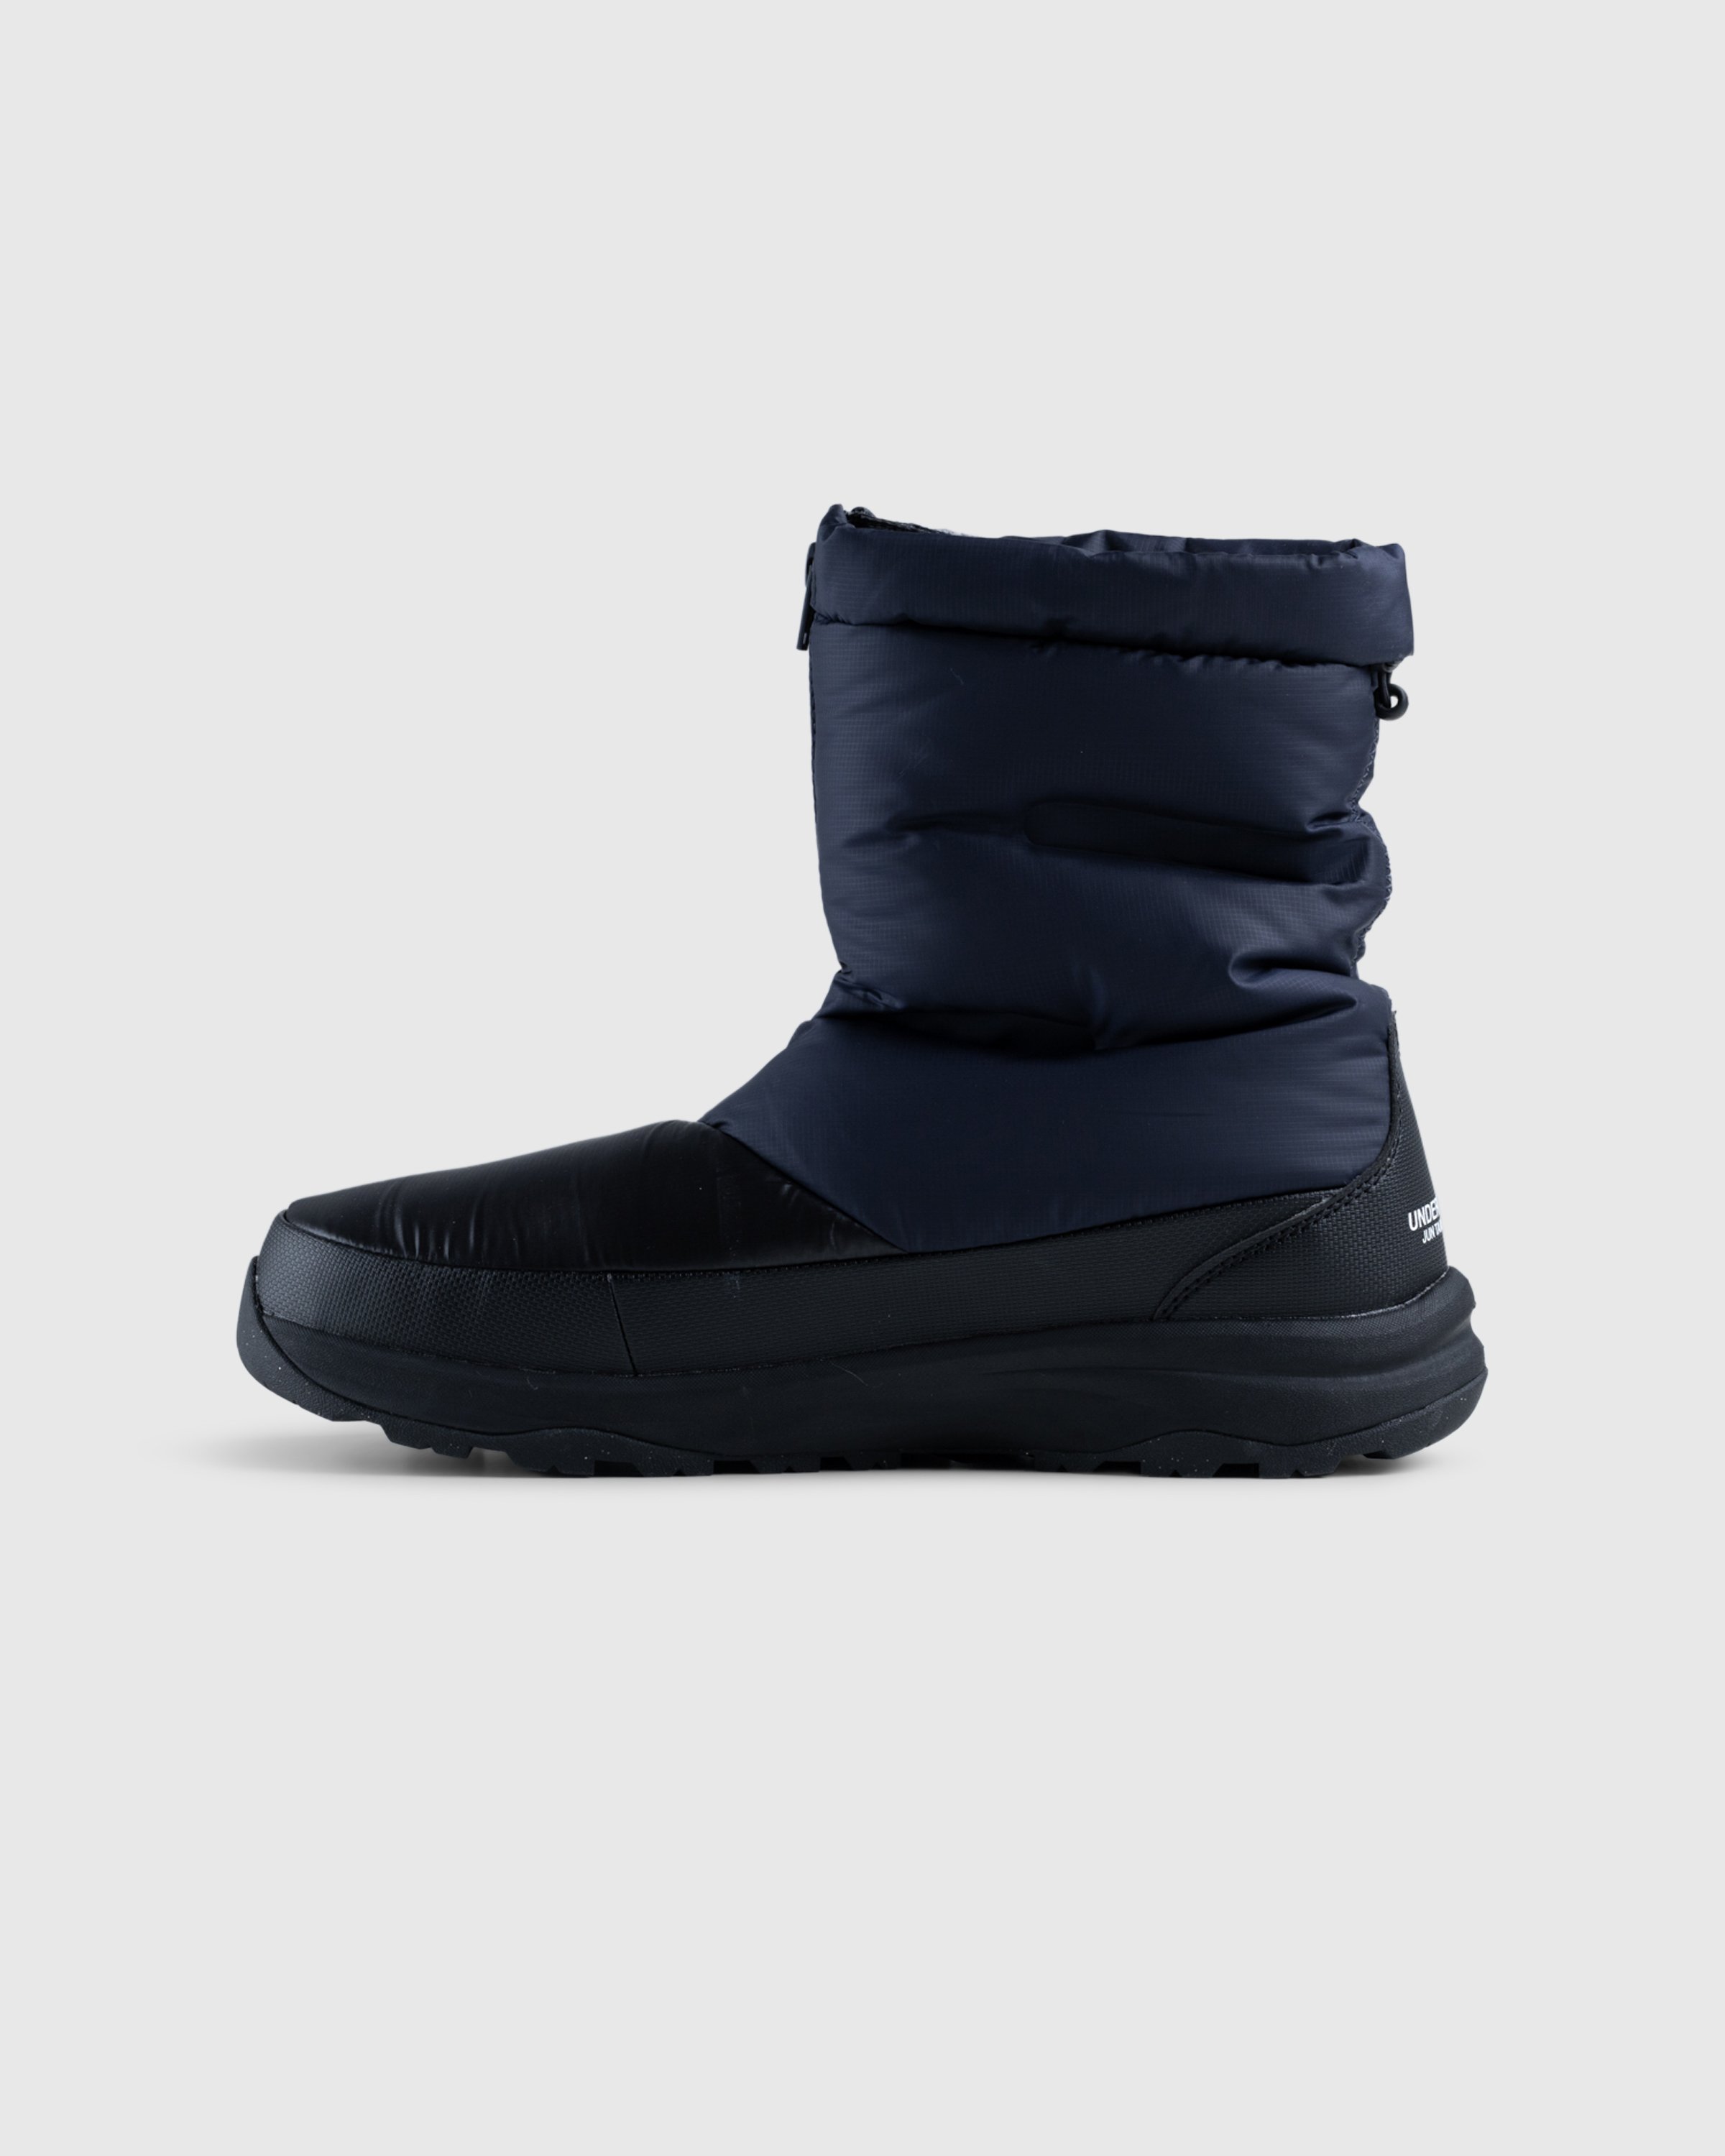 The North Face x UNDERCOVER - DOWN BOOTIE - Footwear - Multi - Image 2